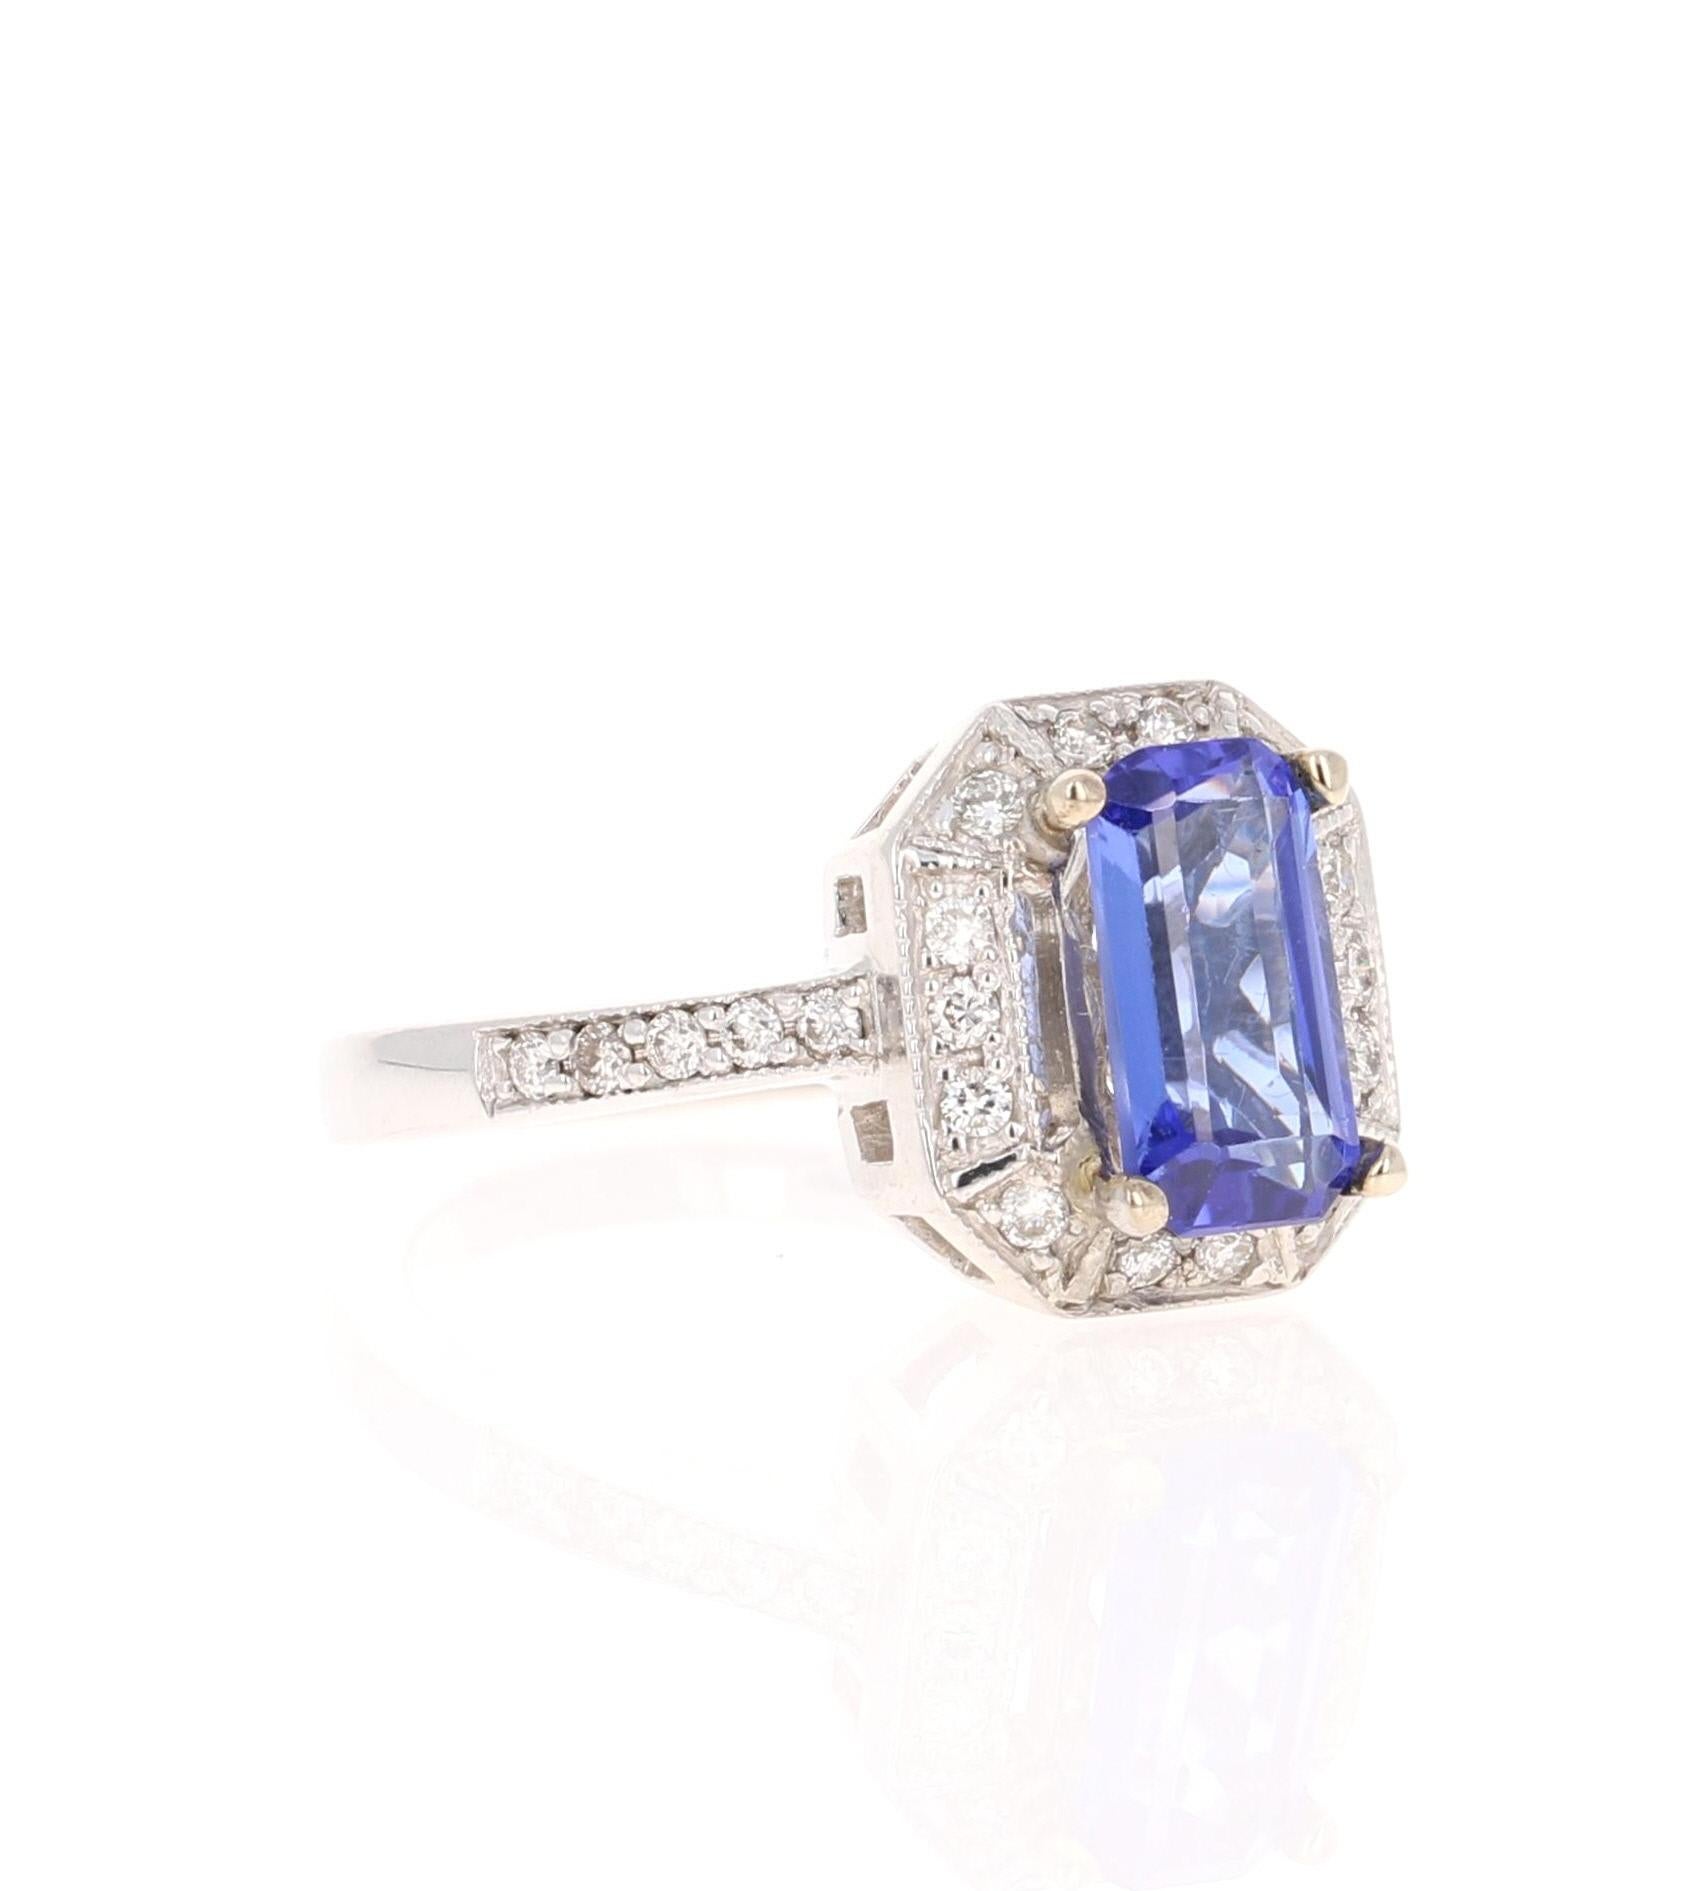 This beautiful ring has a vivid 1.66 Carat Emerald Cut Tanzanite. The Tanzanite is surrounded by 26 Round Cut Diamonds that weigh 0.34 Carats. (Clarity: SI, Color: F)  The total carat weight of the ring is 2.00 Carats.  

The tanzanite measures at 5